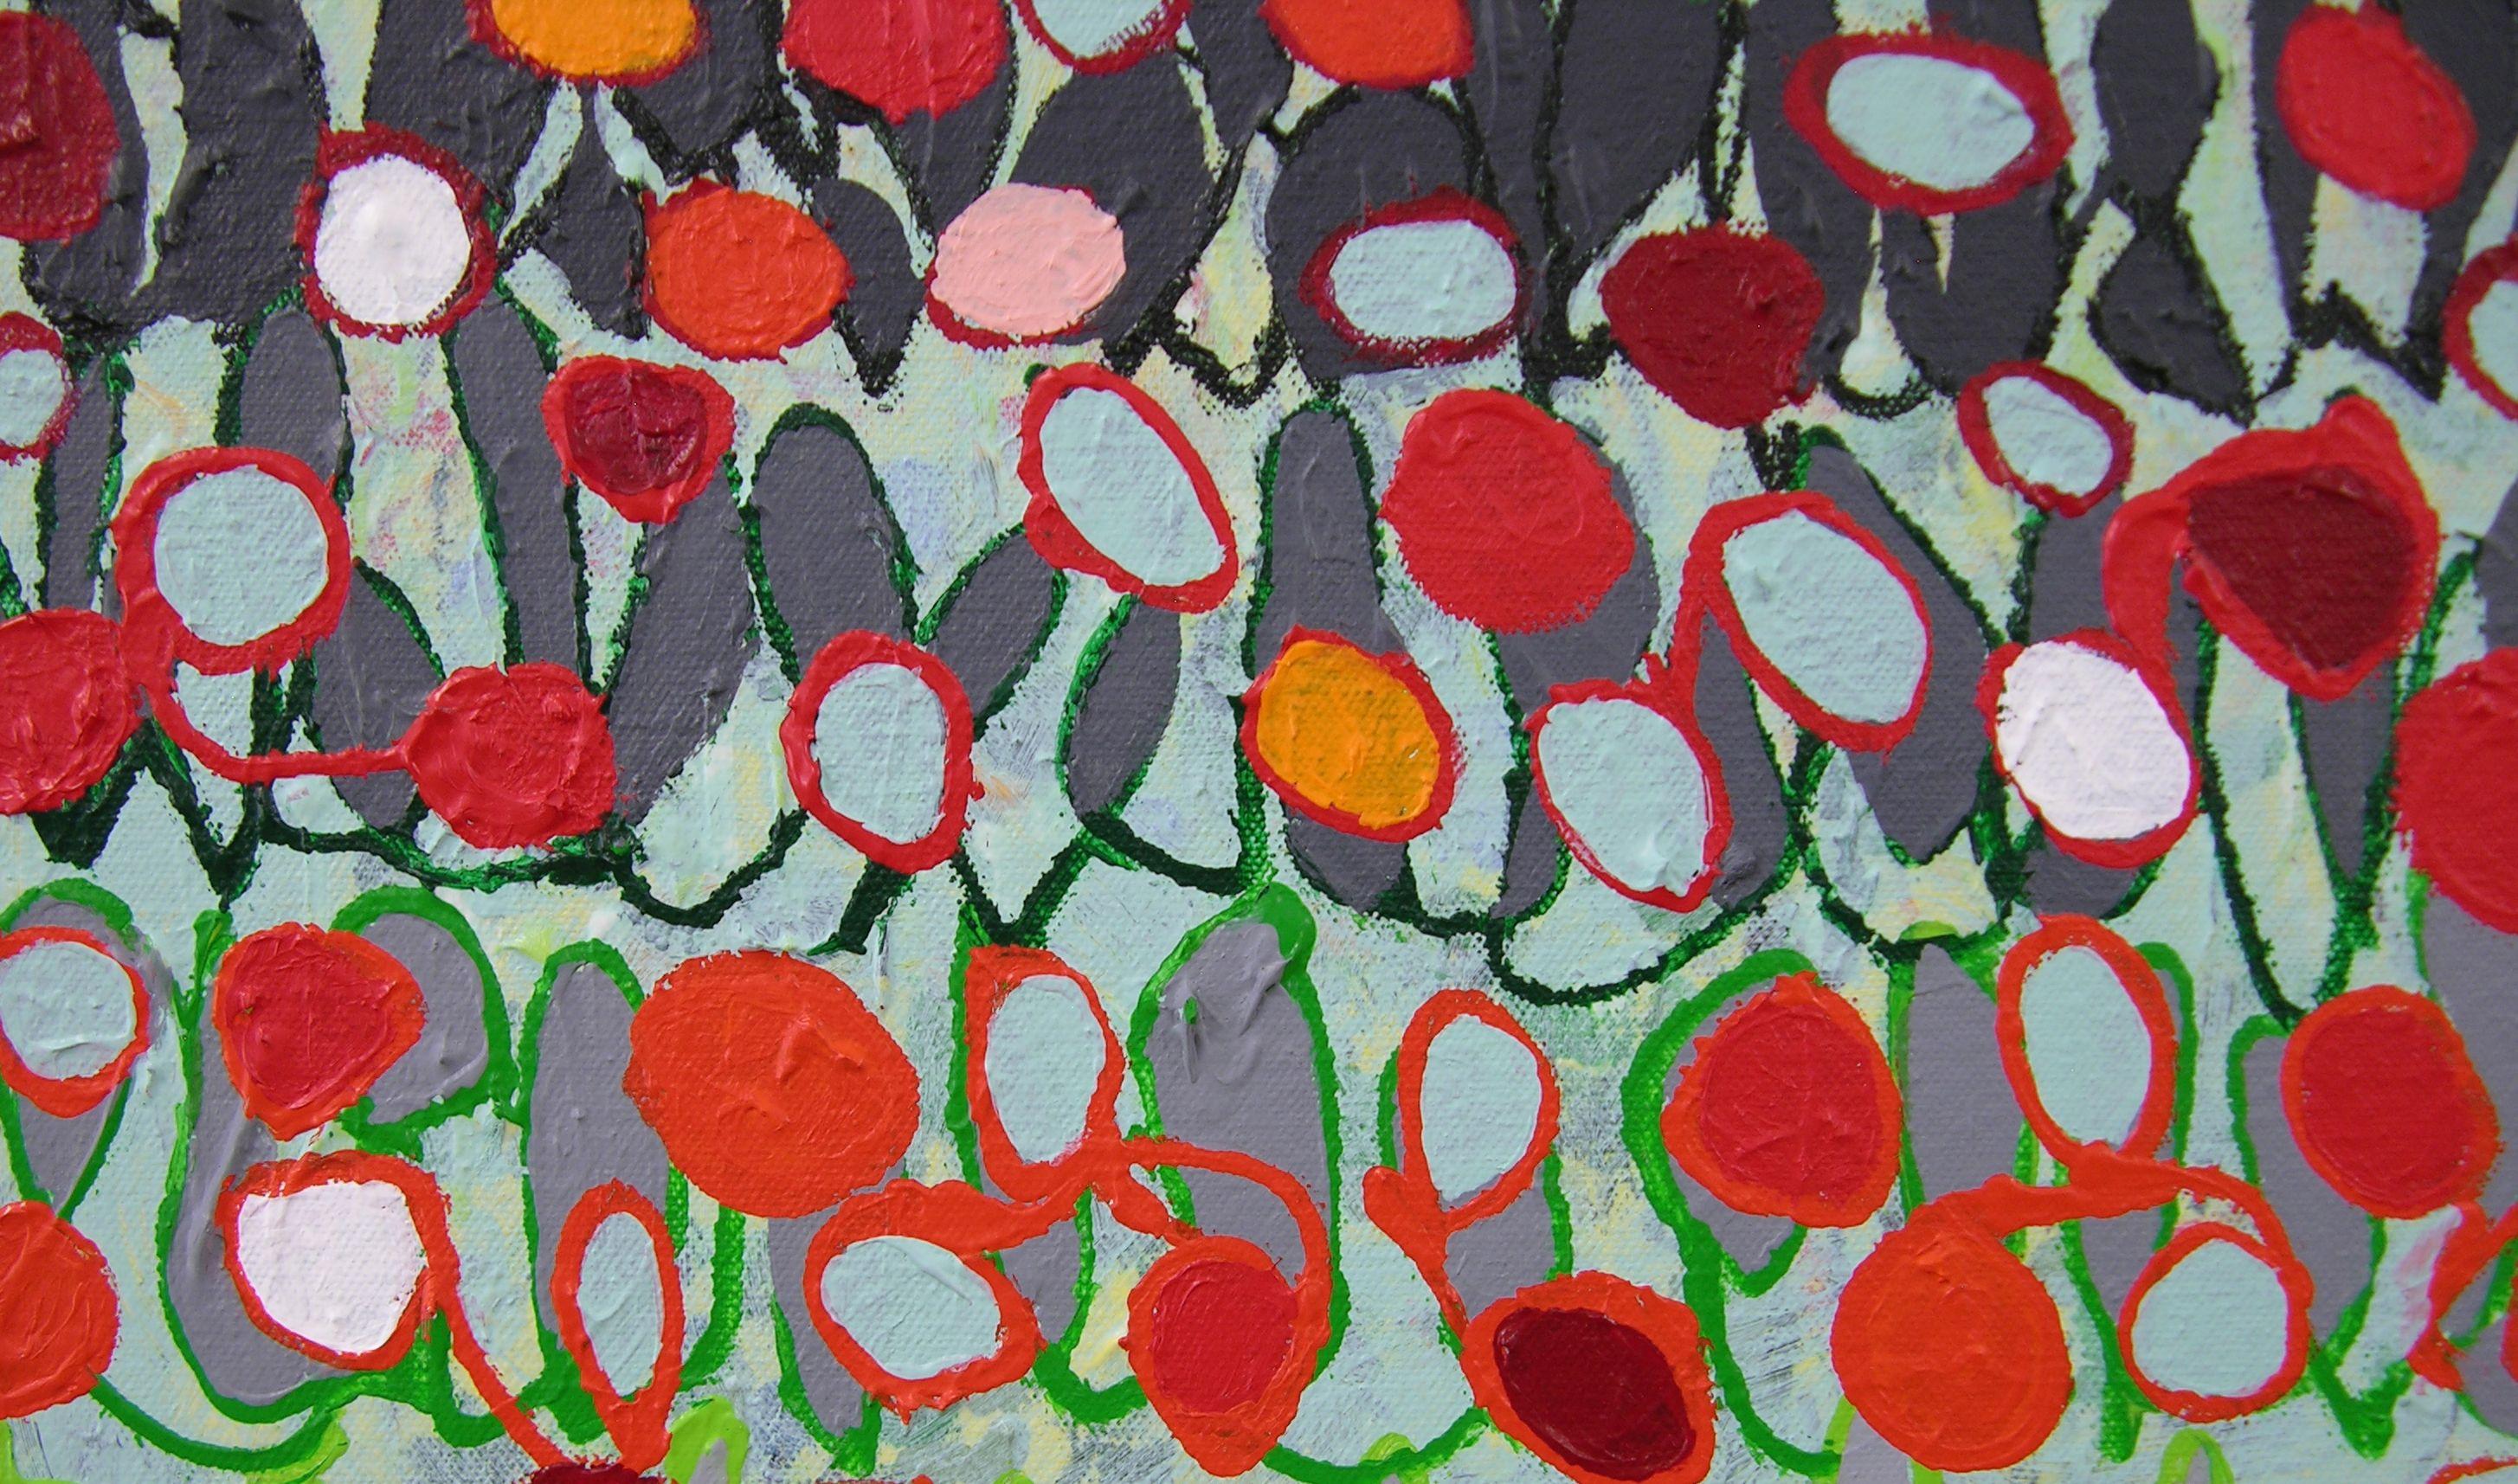 Baubles And Bubbles is a cheerful painting with bright colors and strong texture. Itâ€™s a garden party on its way to a balloon festival.    44â€ x 20â€ x 1.5â€ original painting on stretched canvas, with the image continuing around the sides so